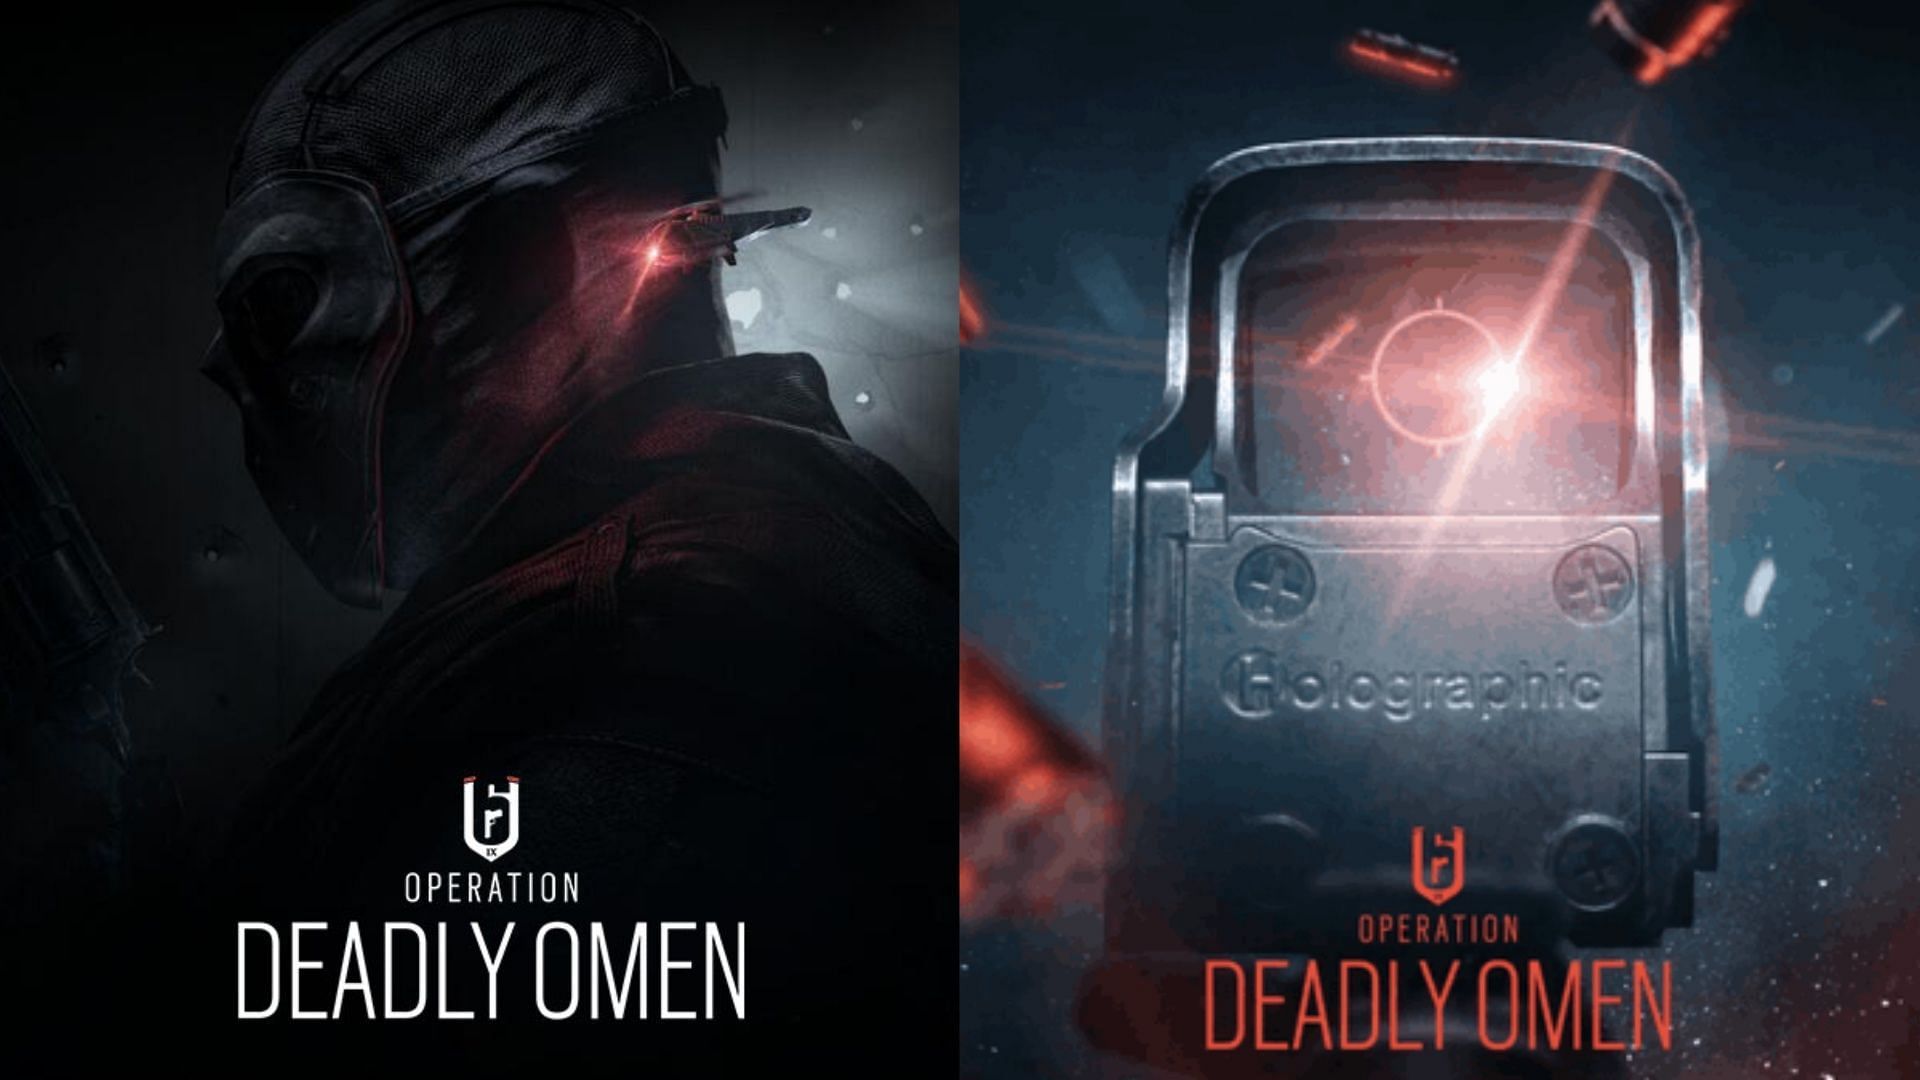 Rainbow Six Siege Y9S1 Operation Deadly Omen download sizes for all platforms (Image via Ubisoft)